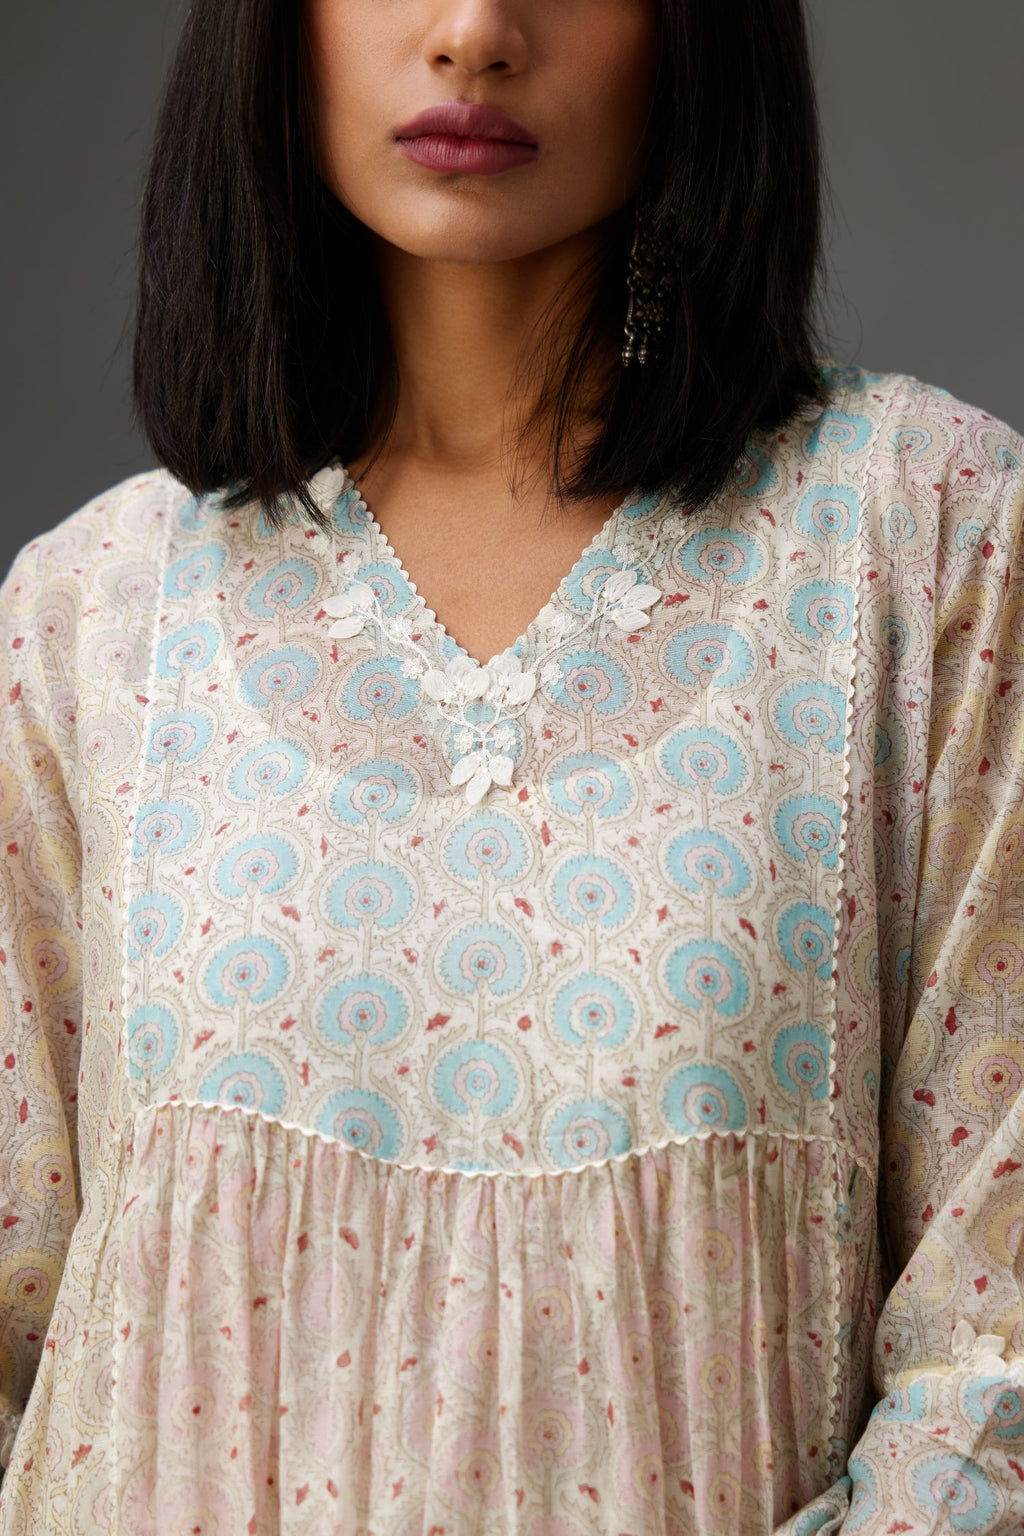 Mixed print hand-block printed easy fit straight kurta set with thread and chiffon embroidery flowers.